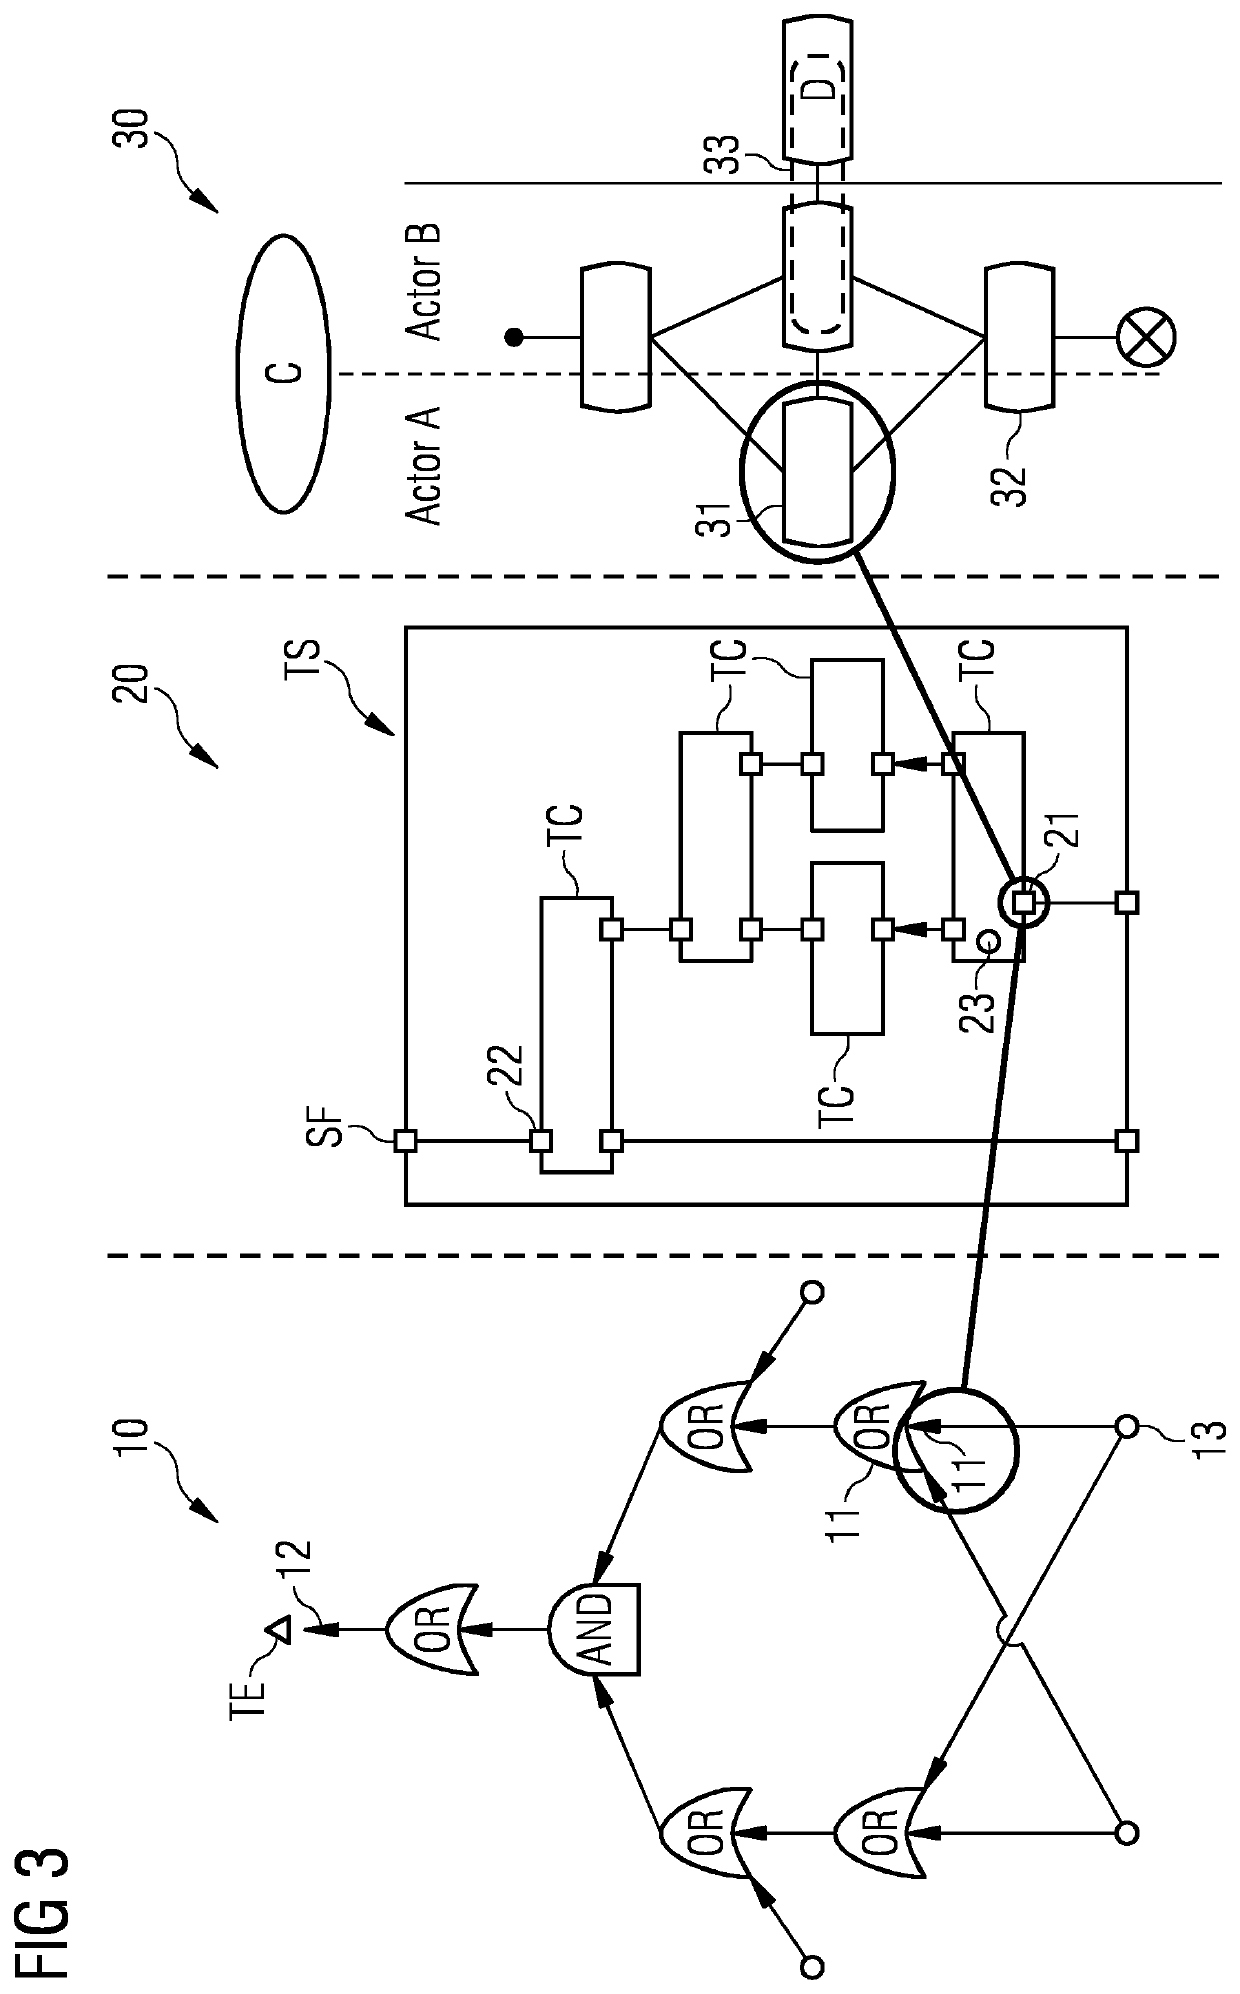 Computer-implemented method and computerized device for testing a technical system